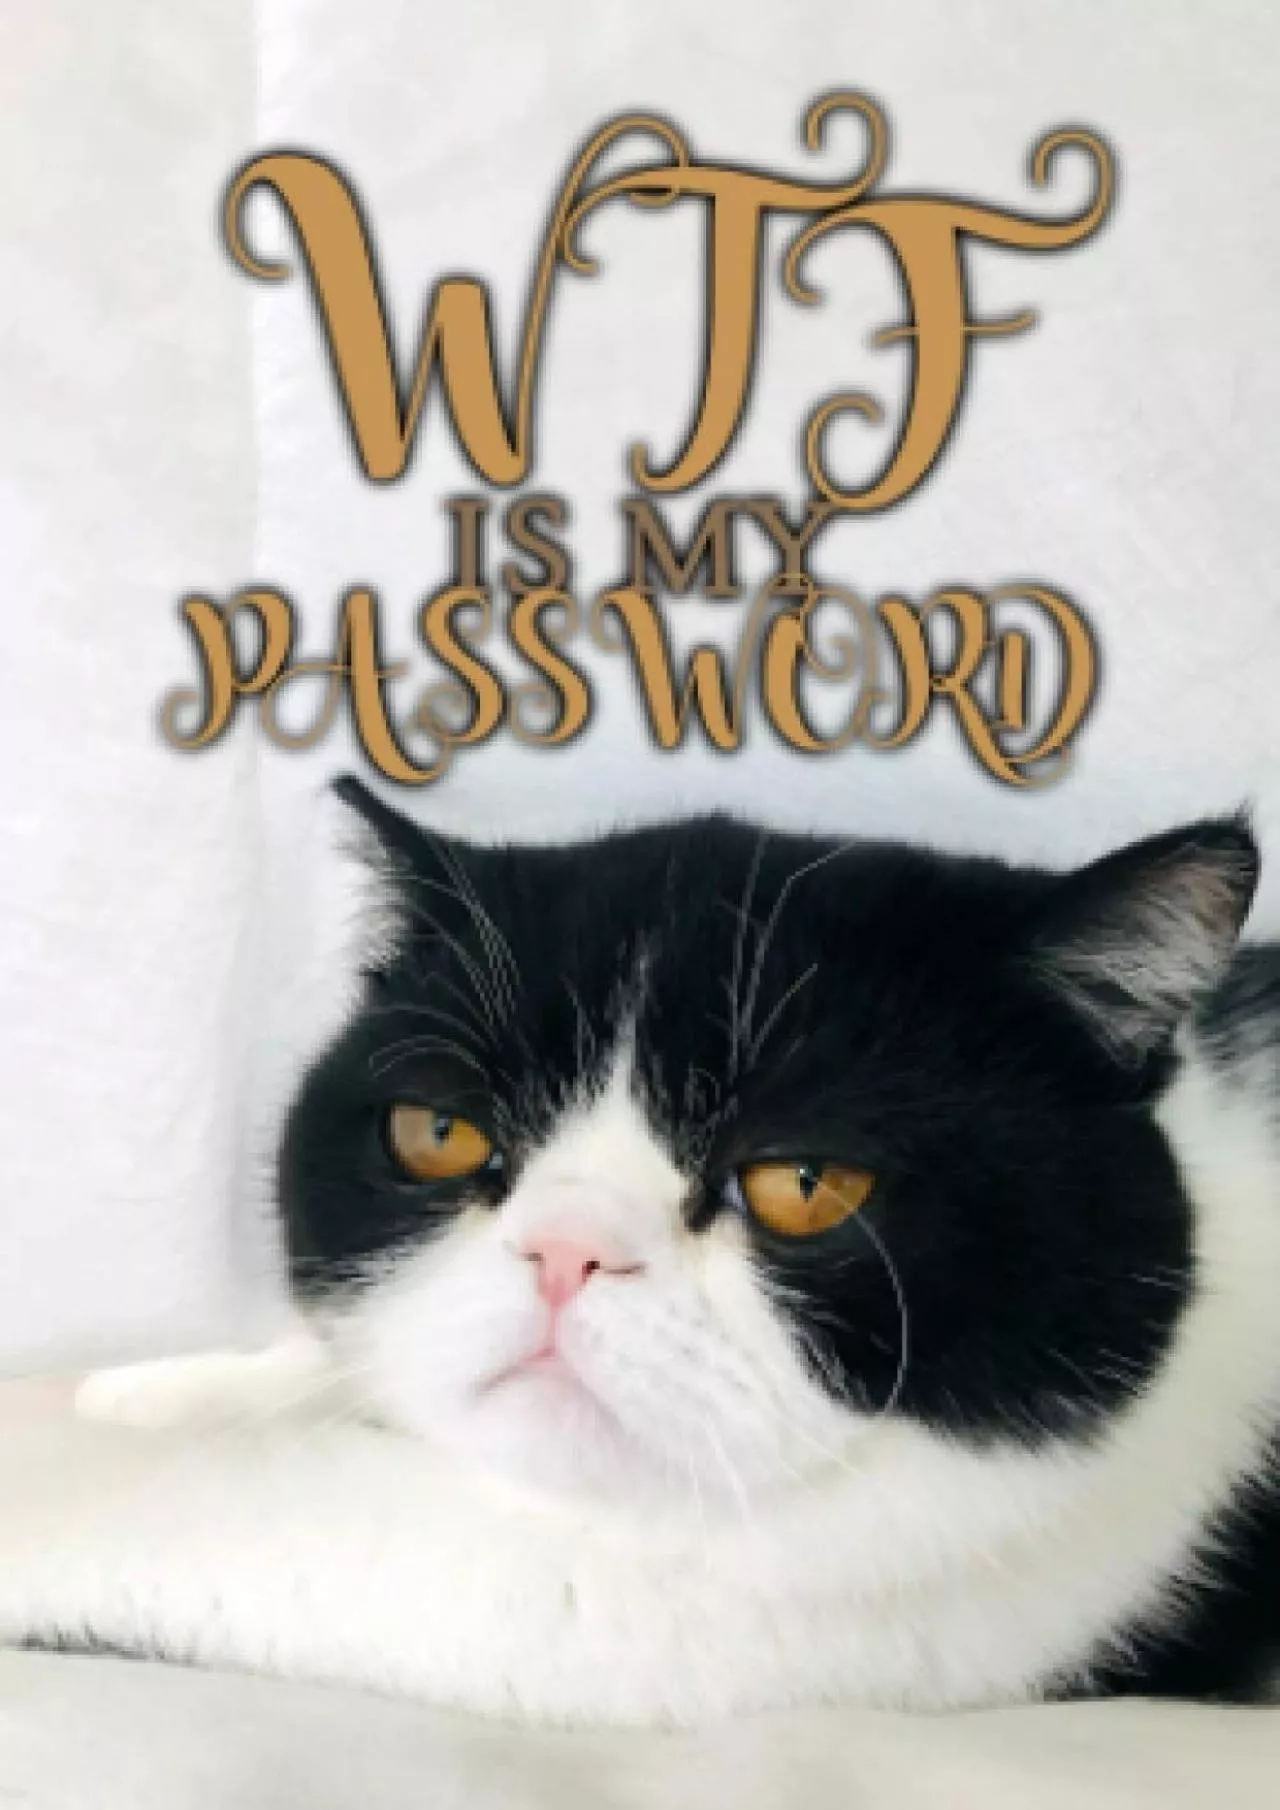 WTF Is My Password: WTF Is My Password Book, Purse Size (4x6 Inches), Internet Password